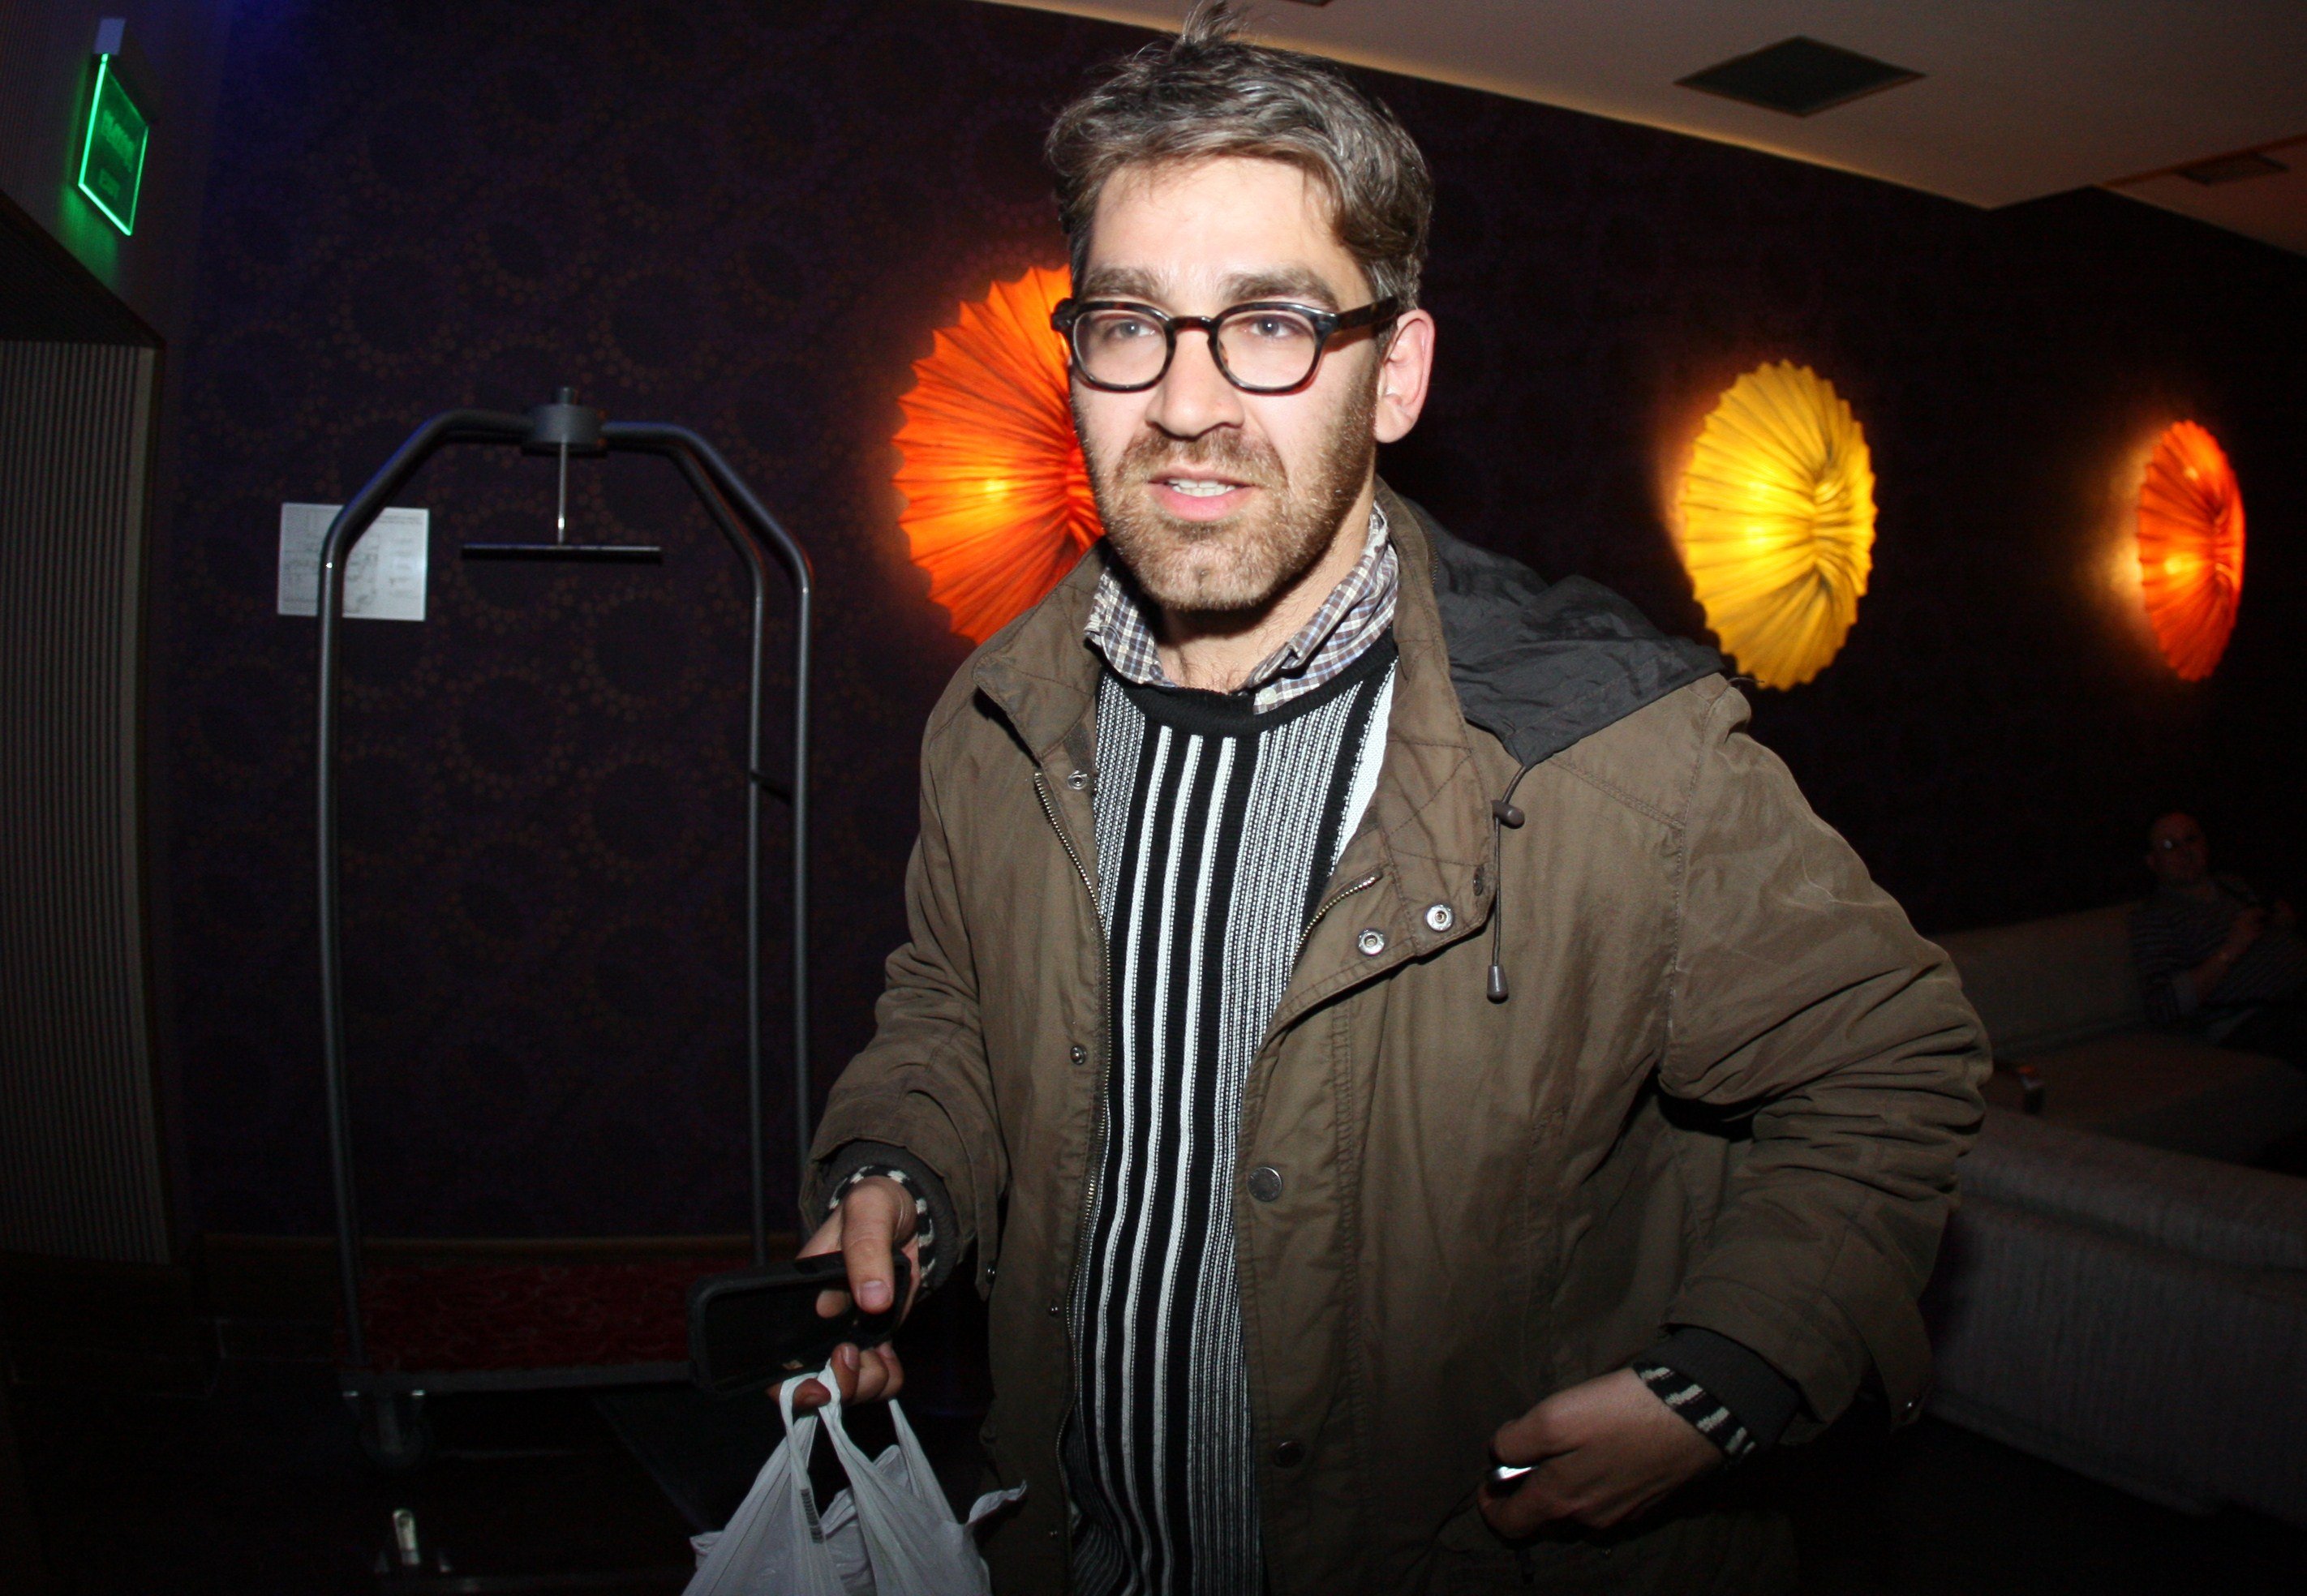 U.S. journalist Simon Ostrovsky, who was abducted and held by pro-Kremlin rebels in east Ukraine this week, arrives in a hotel in the eastern Ukrainian city of Donetsk after being freed, on April 24, 2014. (Alexander Khudoteply—AFP/Getty Images)